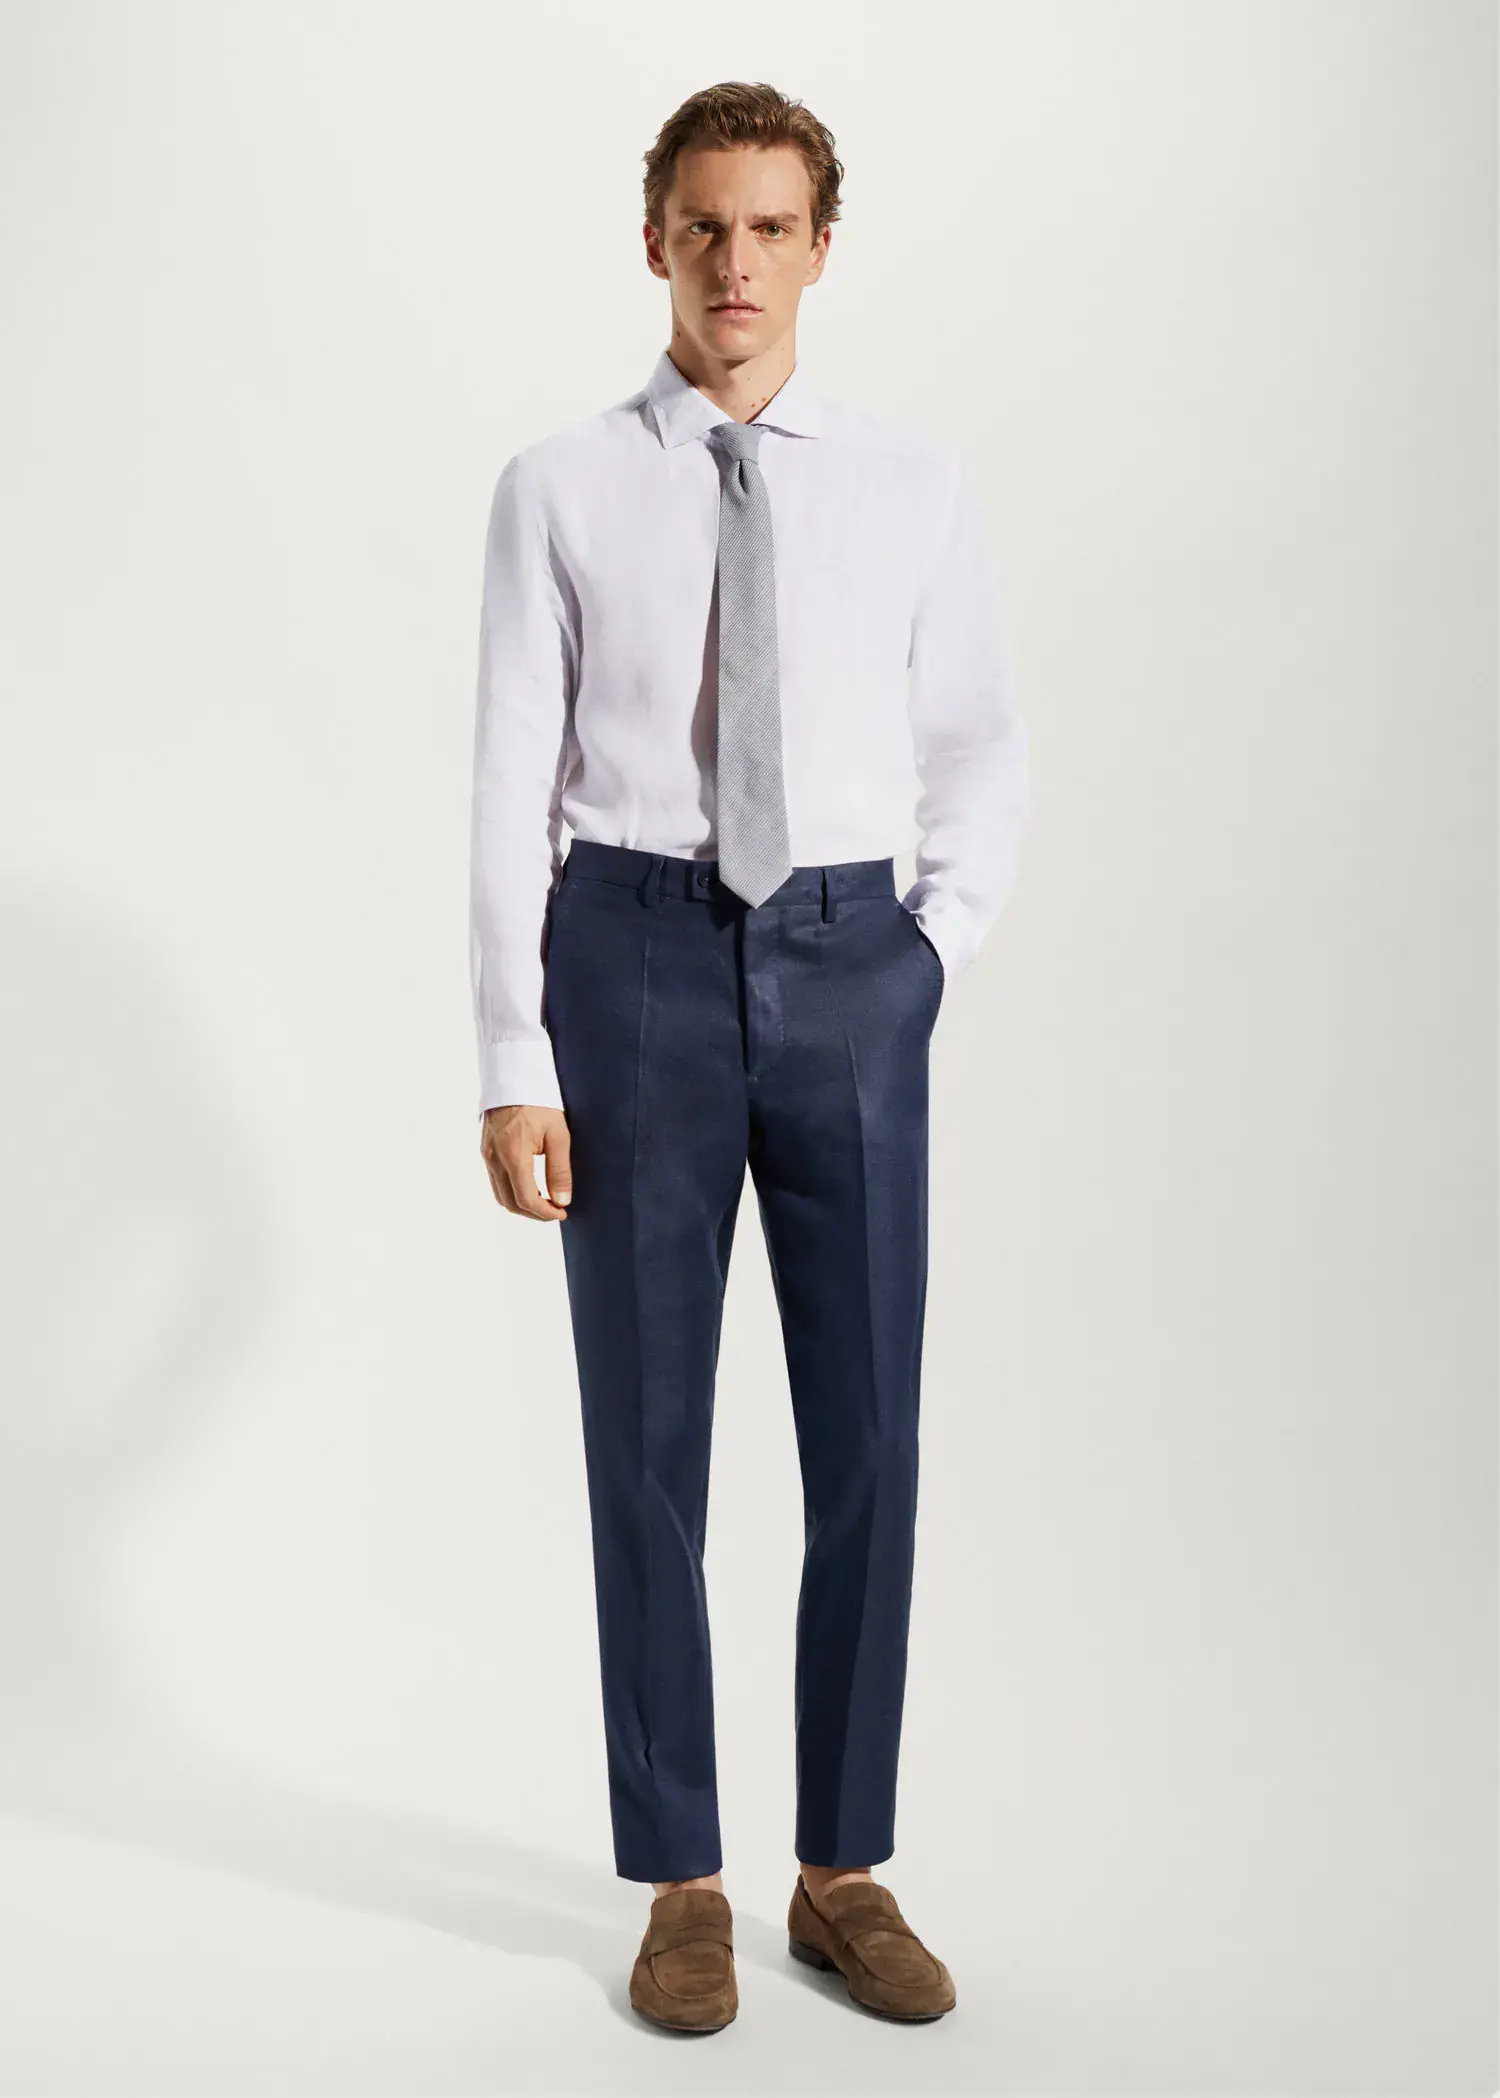 Mango 100% linen suit trousers. a man in a white shirt and blue pants. 